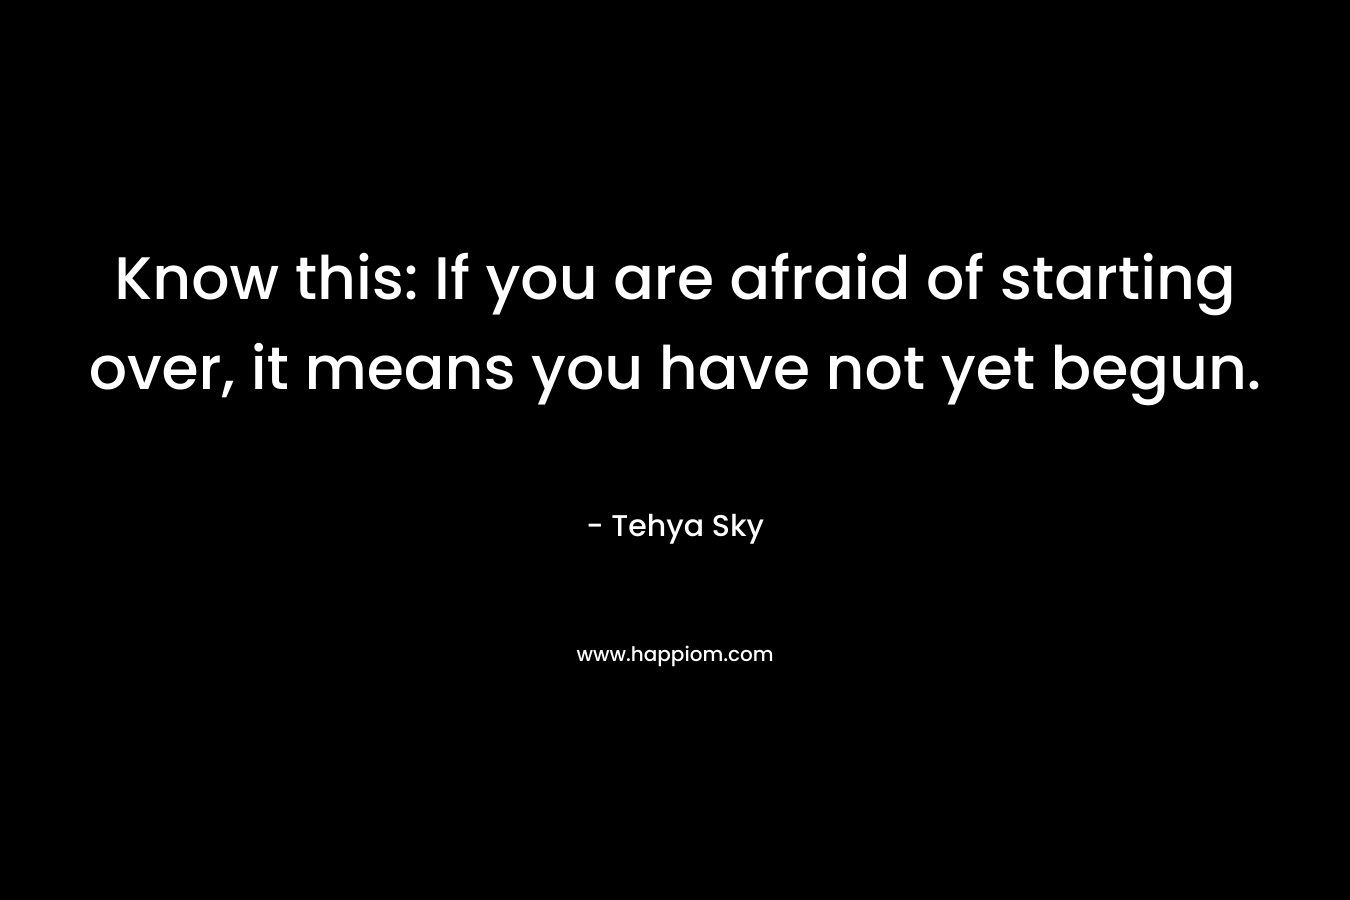 Know this: If you are afraid of starting over, it means you have not yet begun. – Tehya Sky